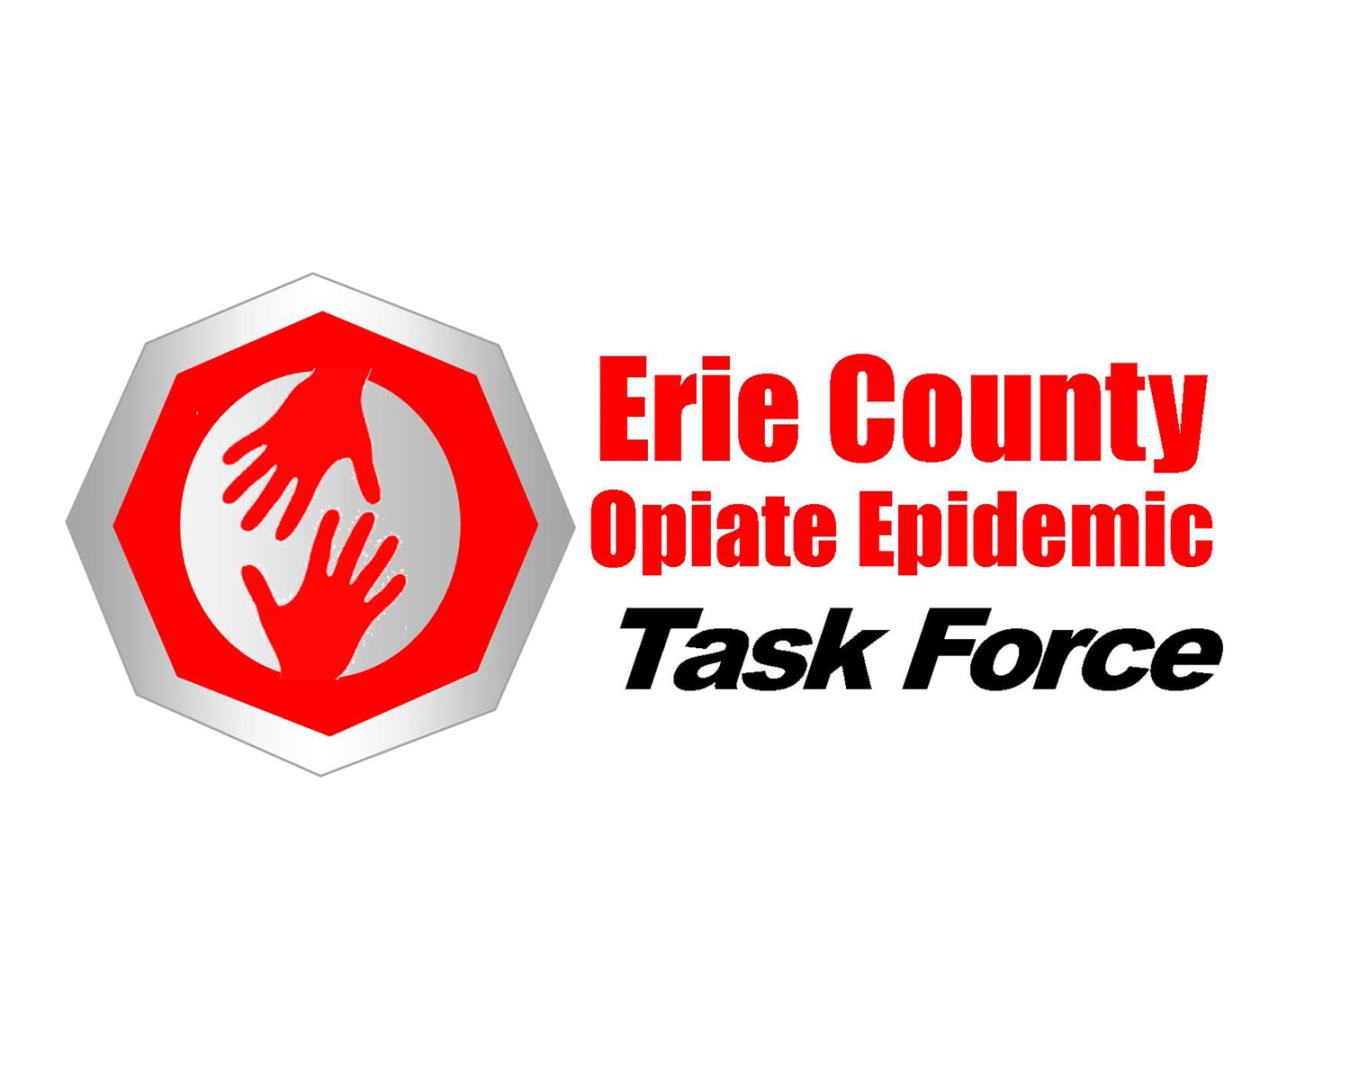 Erie County Opiate Epidemic Task Force